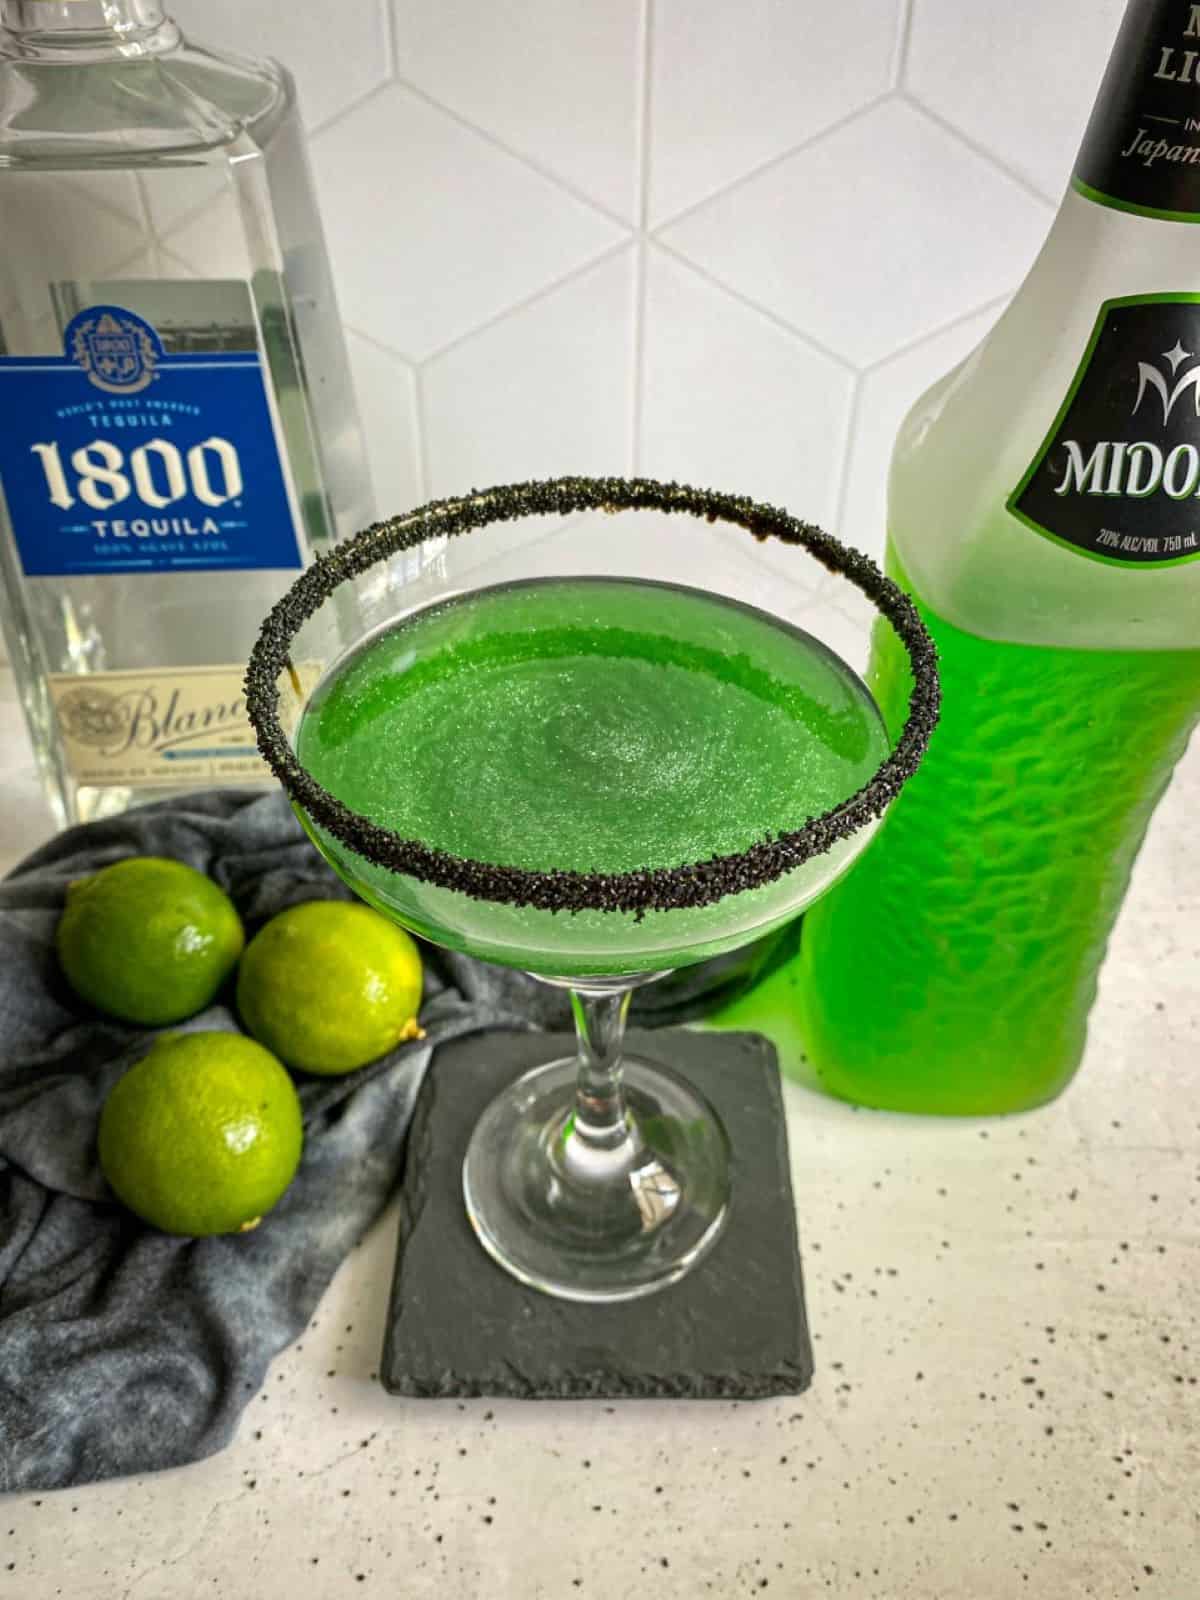 Halloween margarita with a black sugar rim. A bottle of midori melon liqueur and tequila are in the background with three limes.